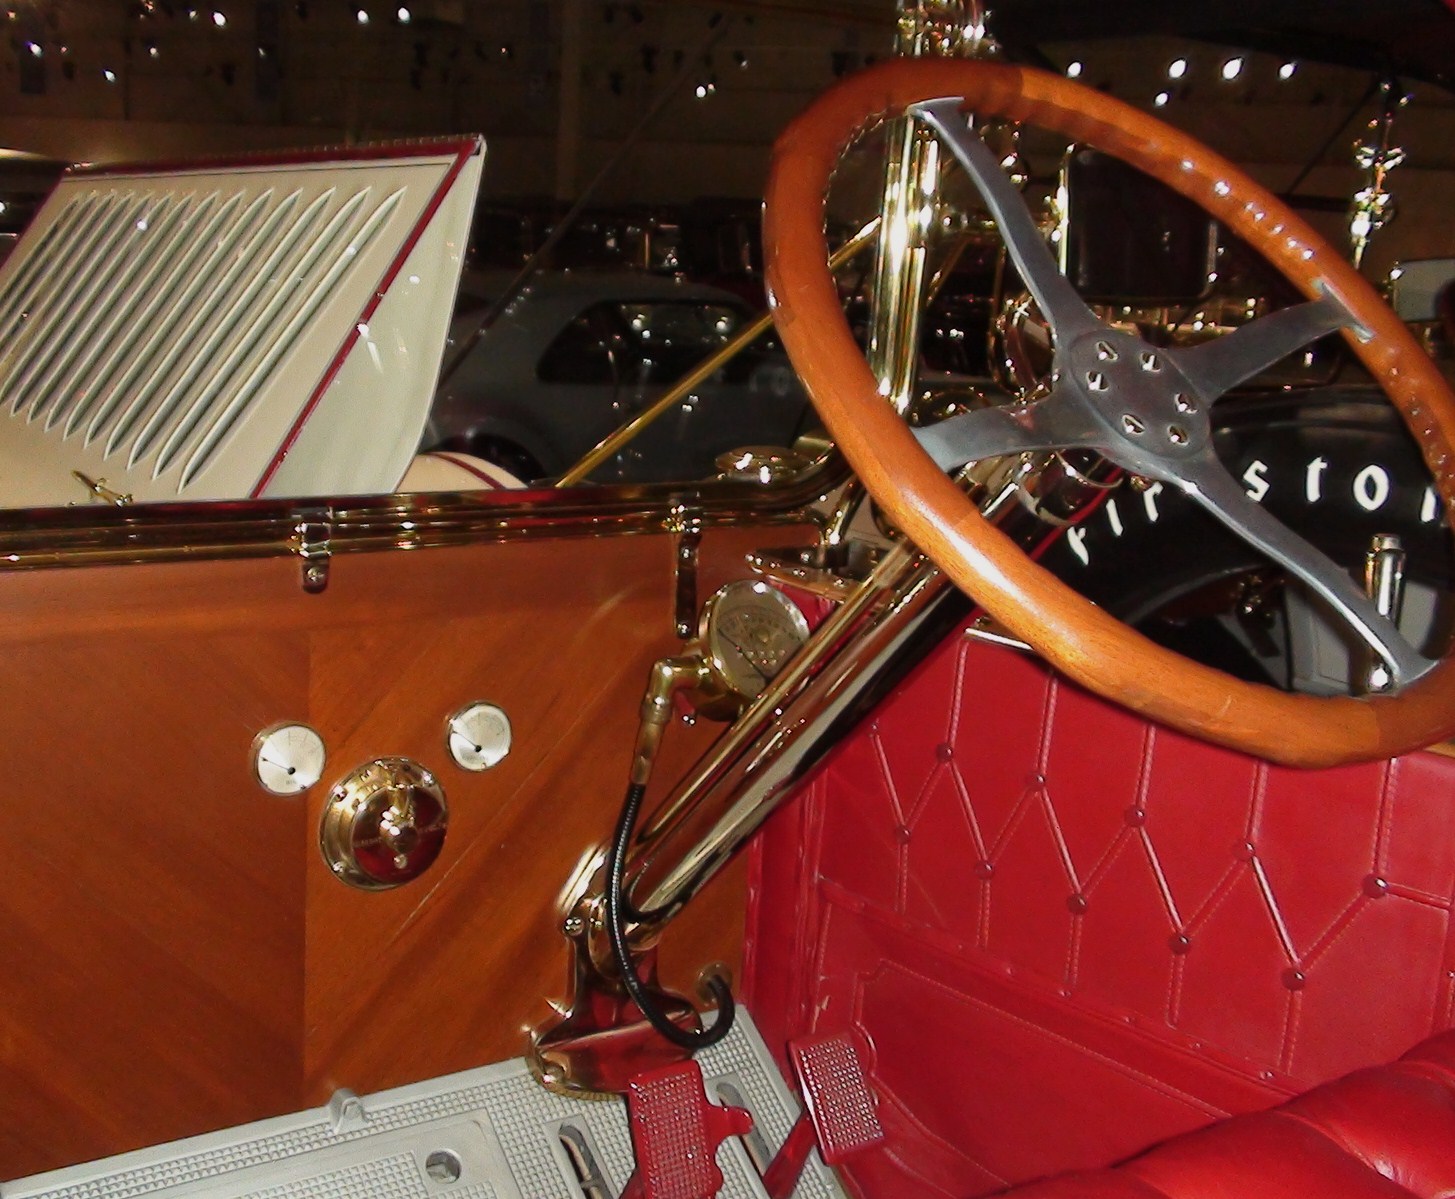 an old model car with a wooden steering wheel